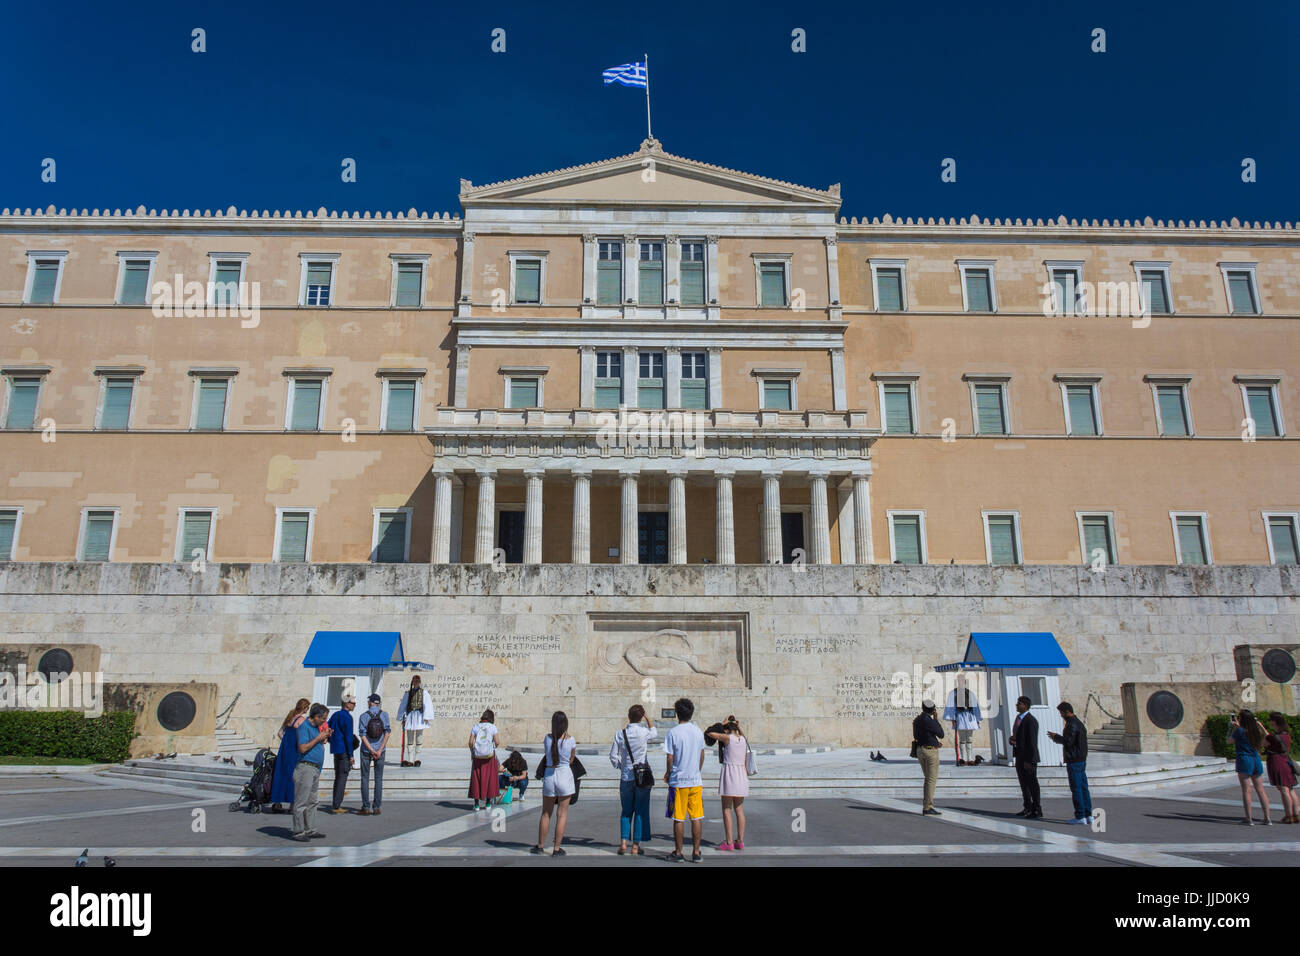 The Hellenic Parliament is the parliament of Greece, located in the Old Royal Palace, overlooking Syntagma Square in Athens. Stock Photo